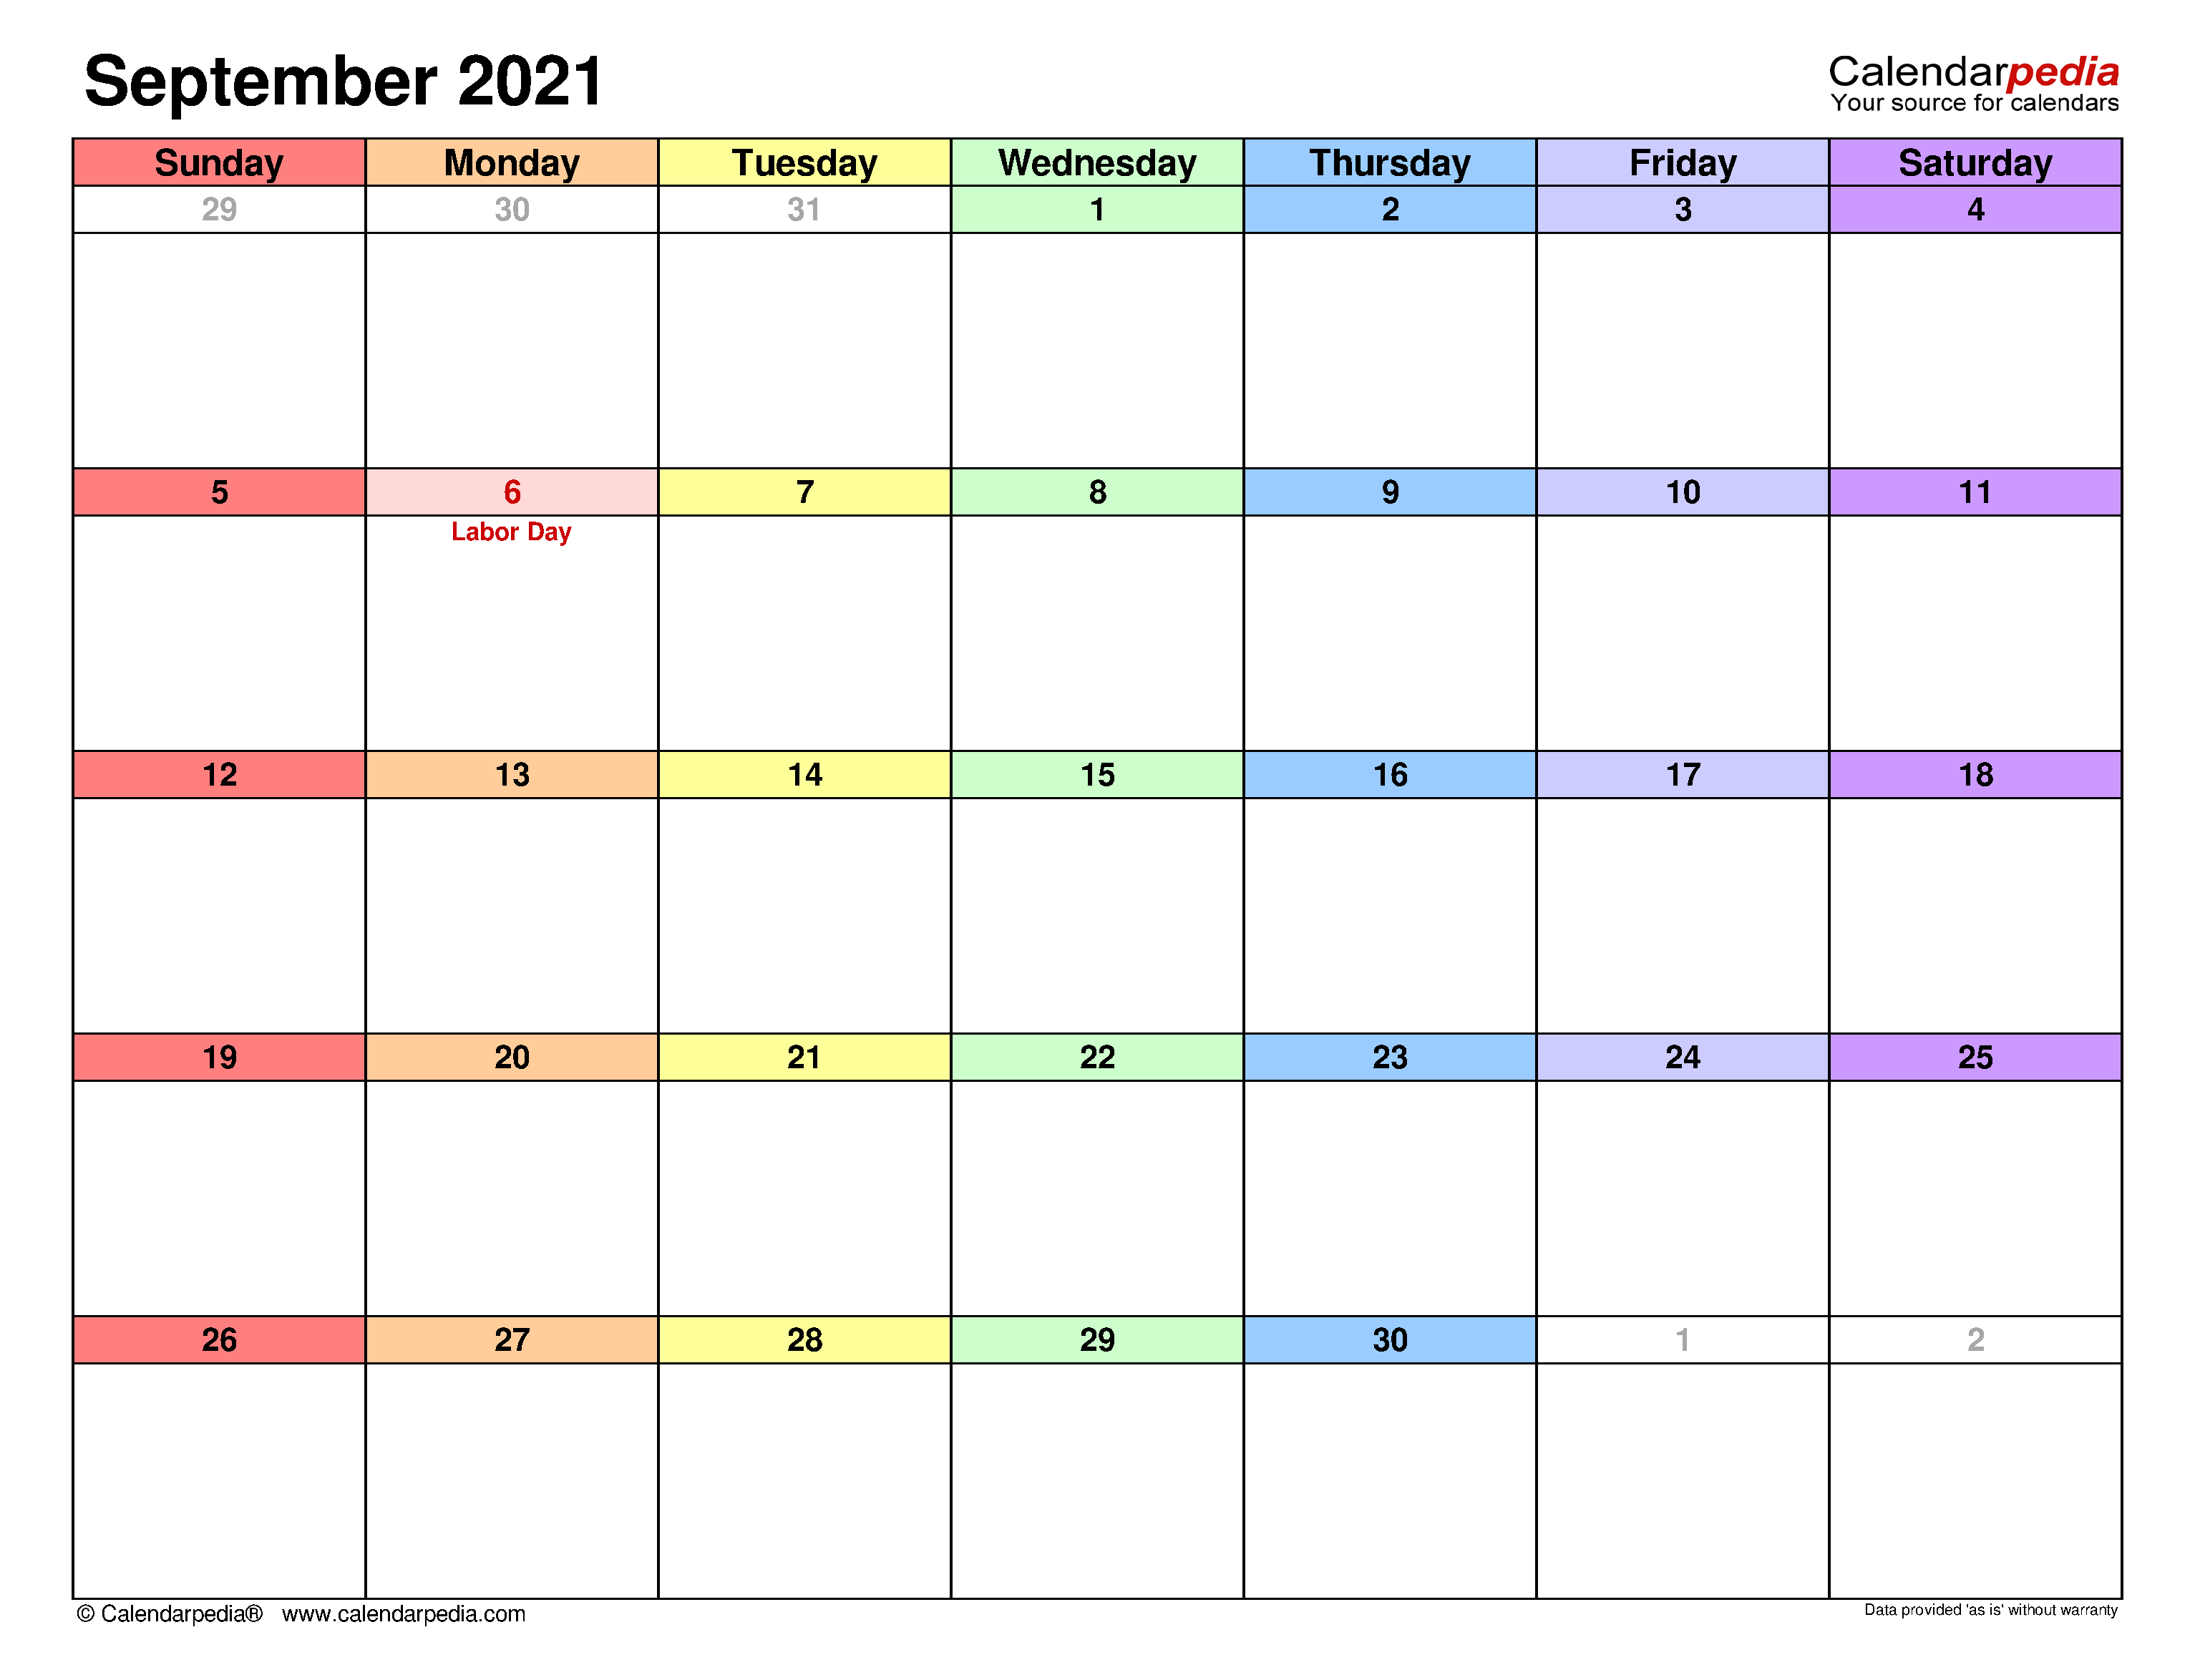 September calendar templates for word excel and pdf